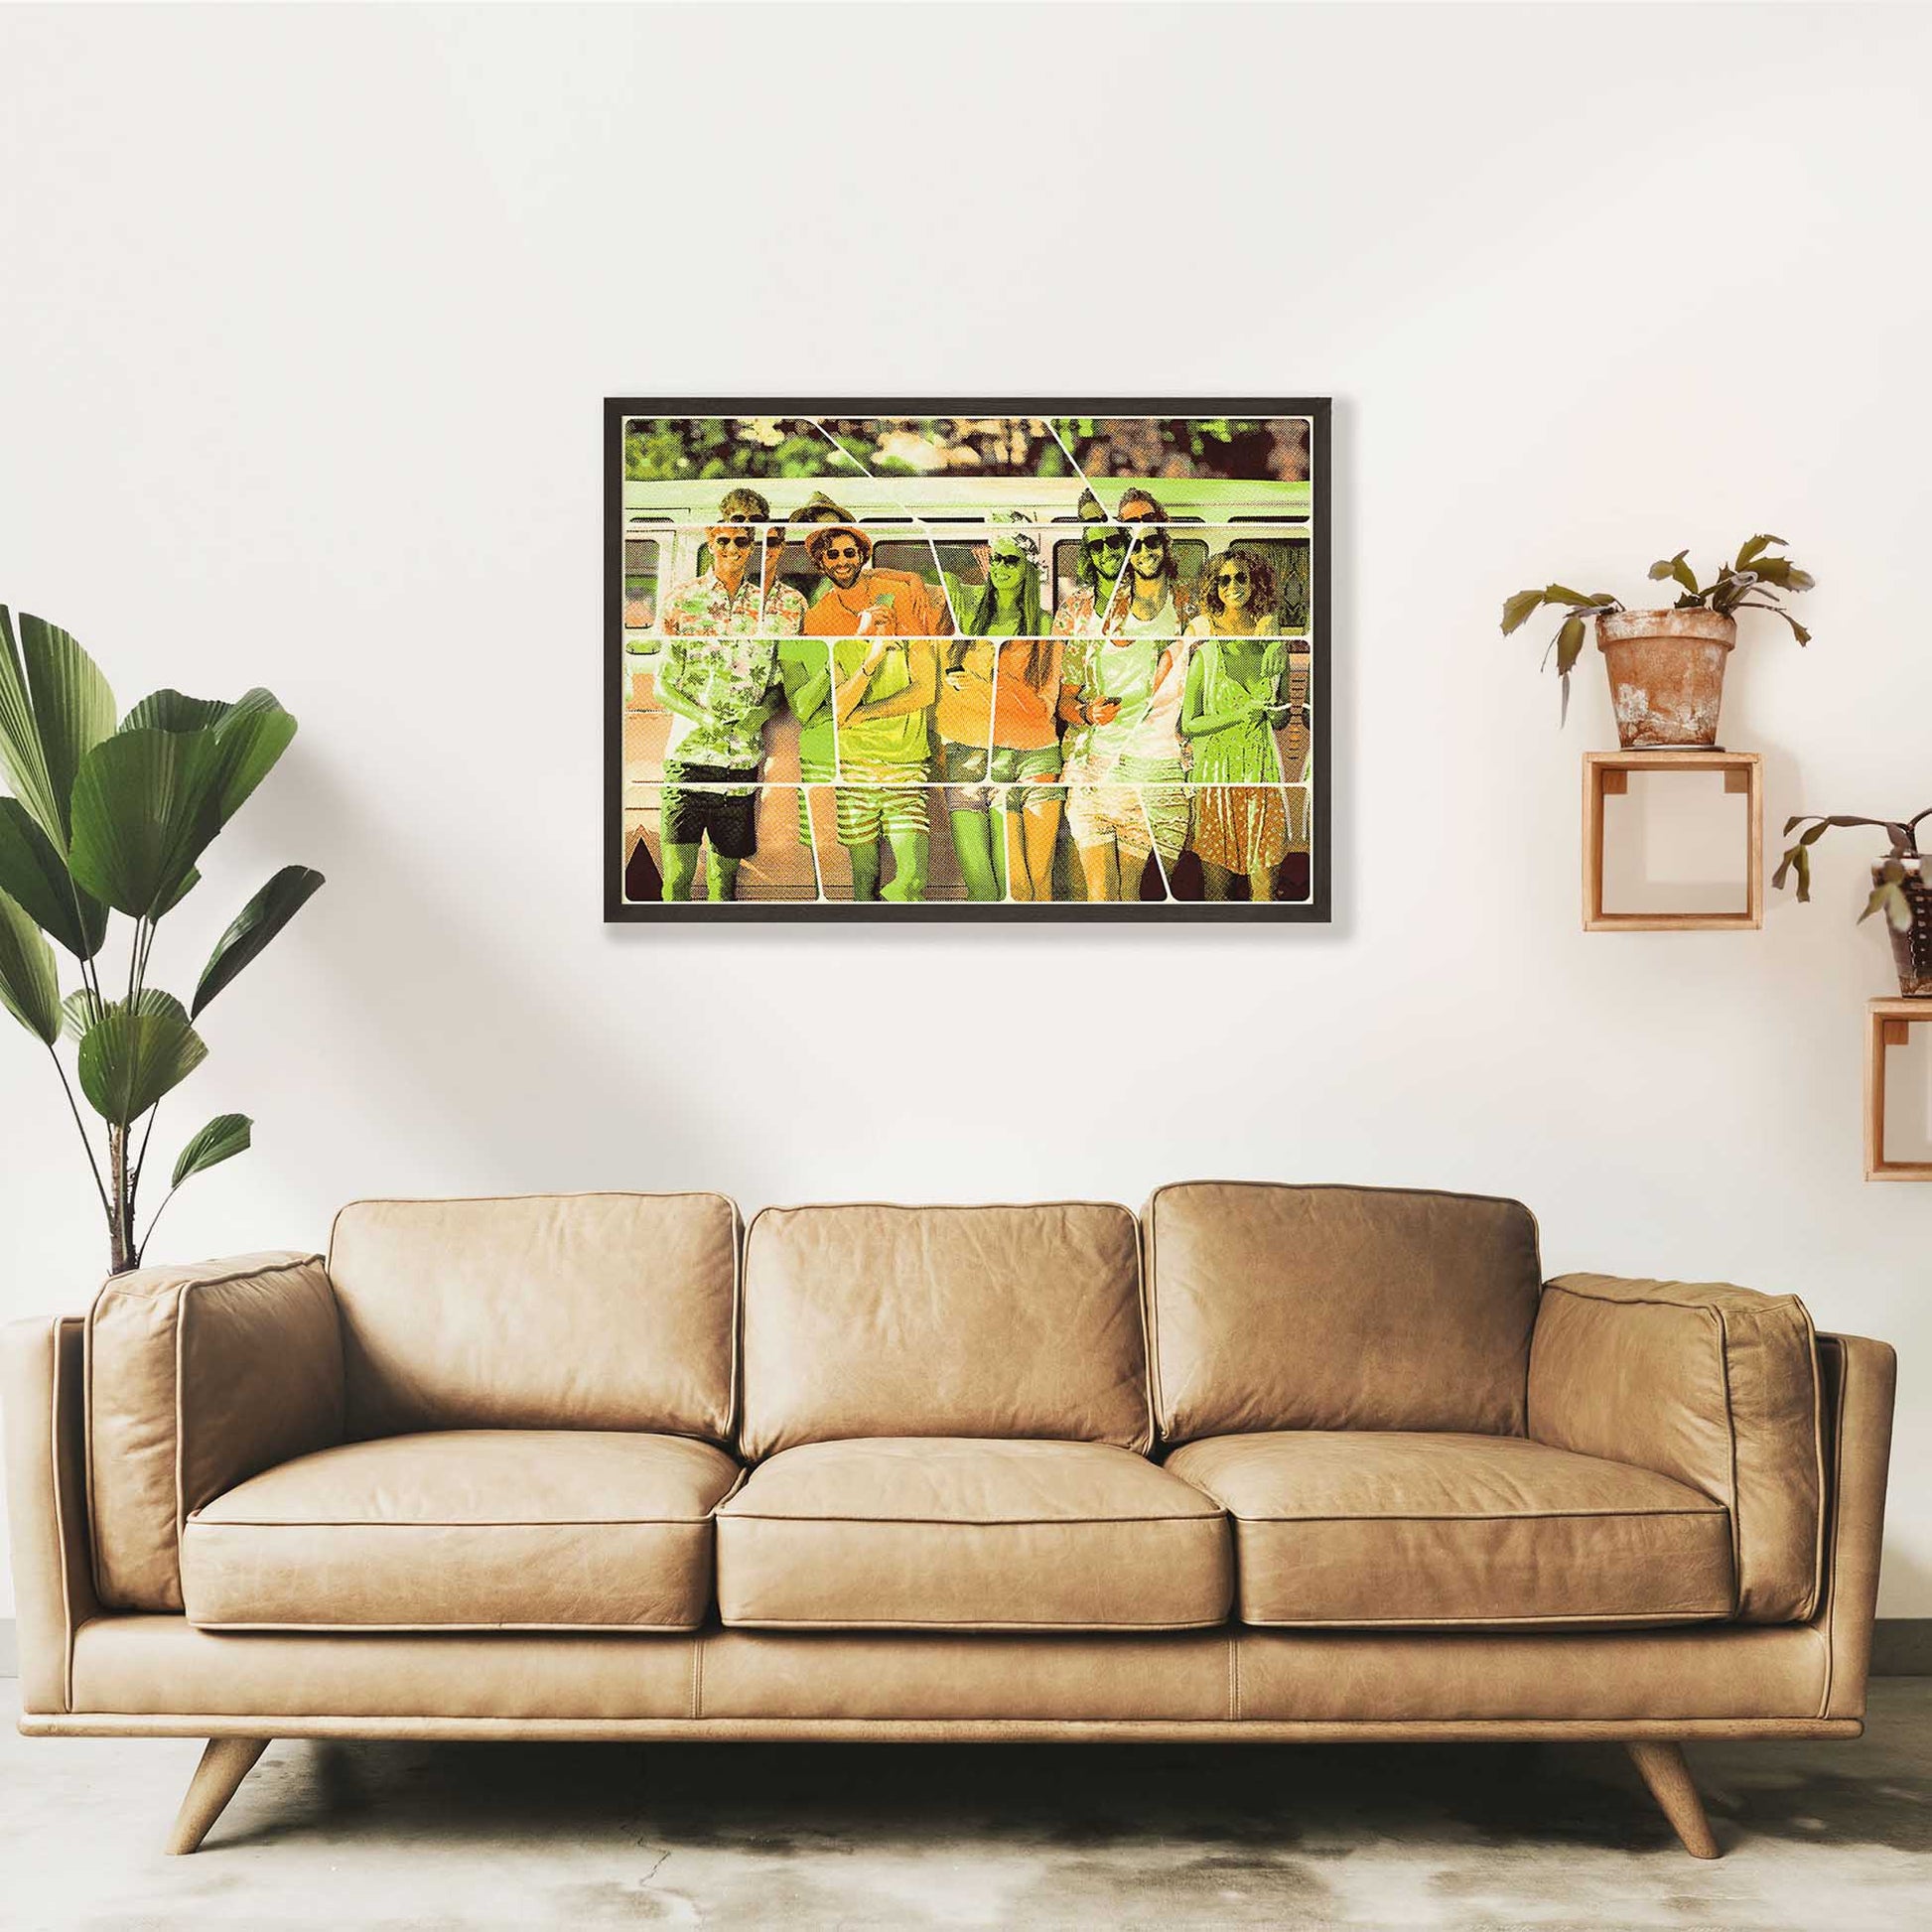 Unleash your inner comic book enthusiast with a Personalised Vintage Comics Framed Print. The retro effect and old-school texture transport you to the nostalgic world of vintage comics. The full-color print, featuring vibrant green and orange